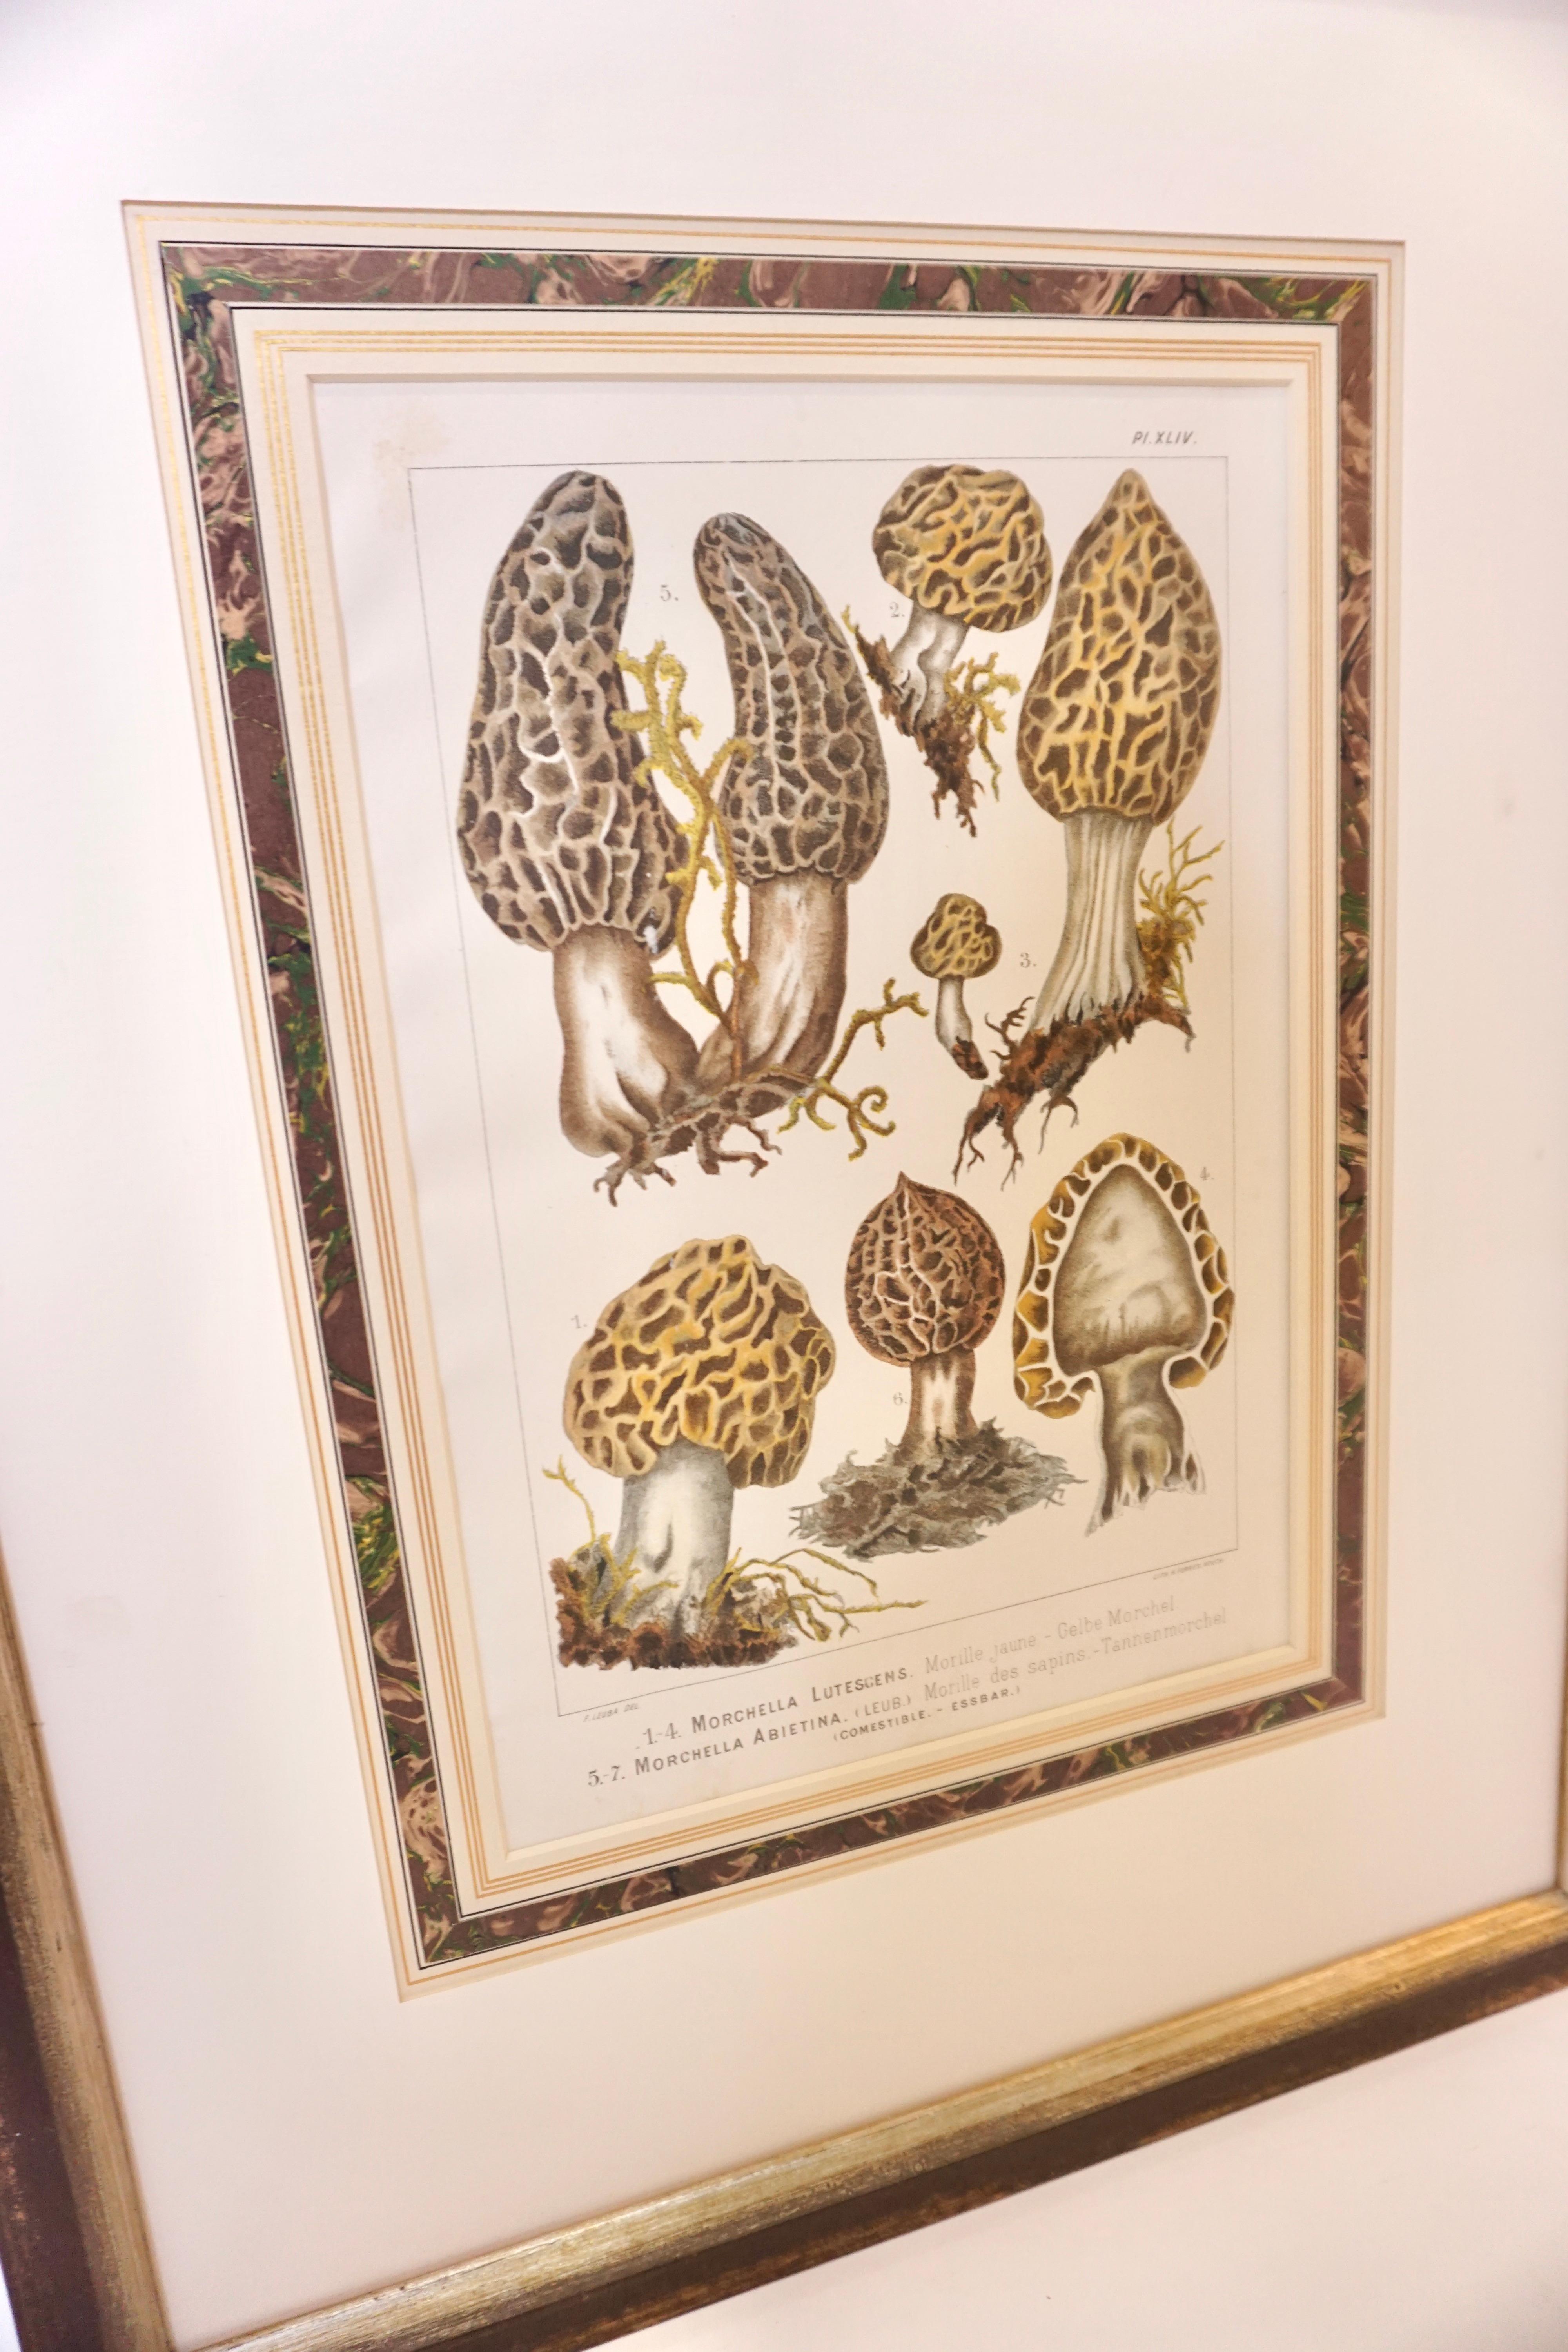 This antique French print is matted and framed in museum glass with a simple wood frame.